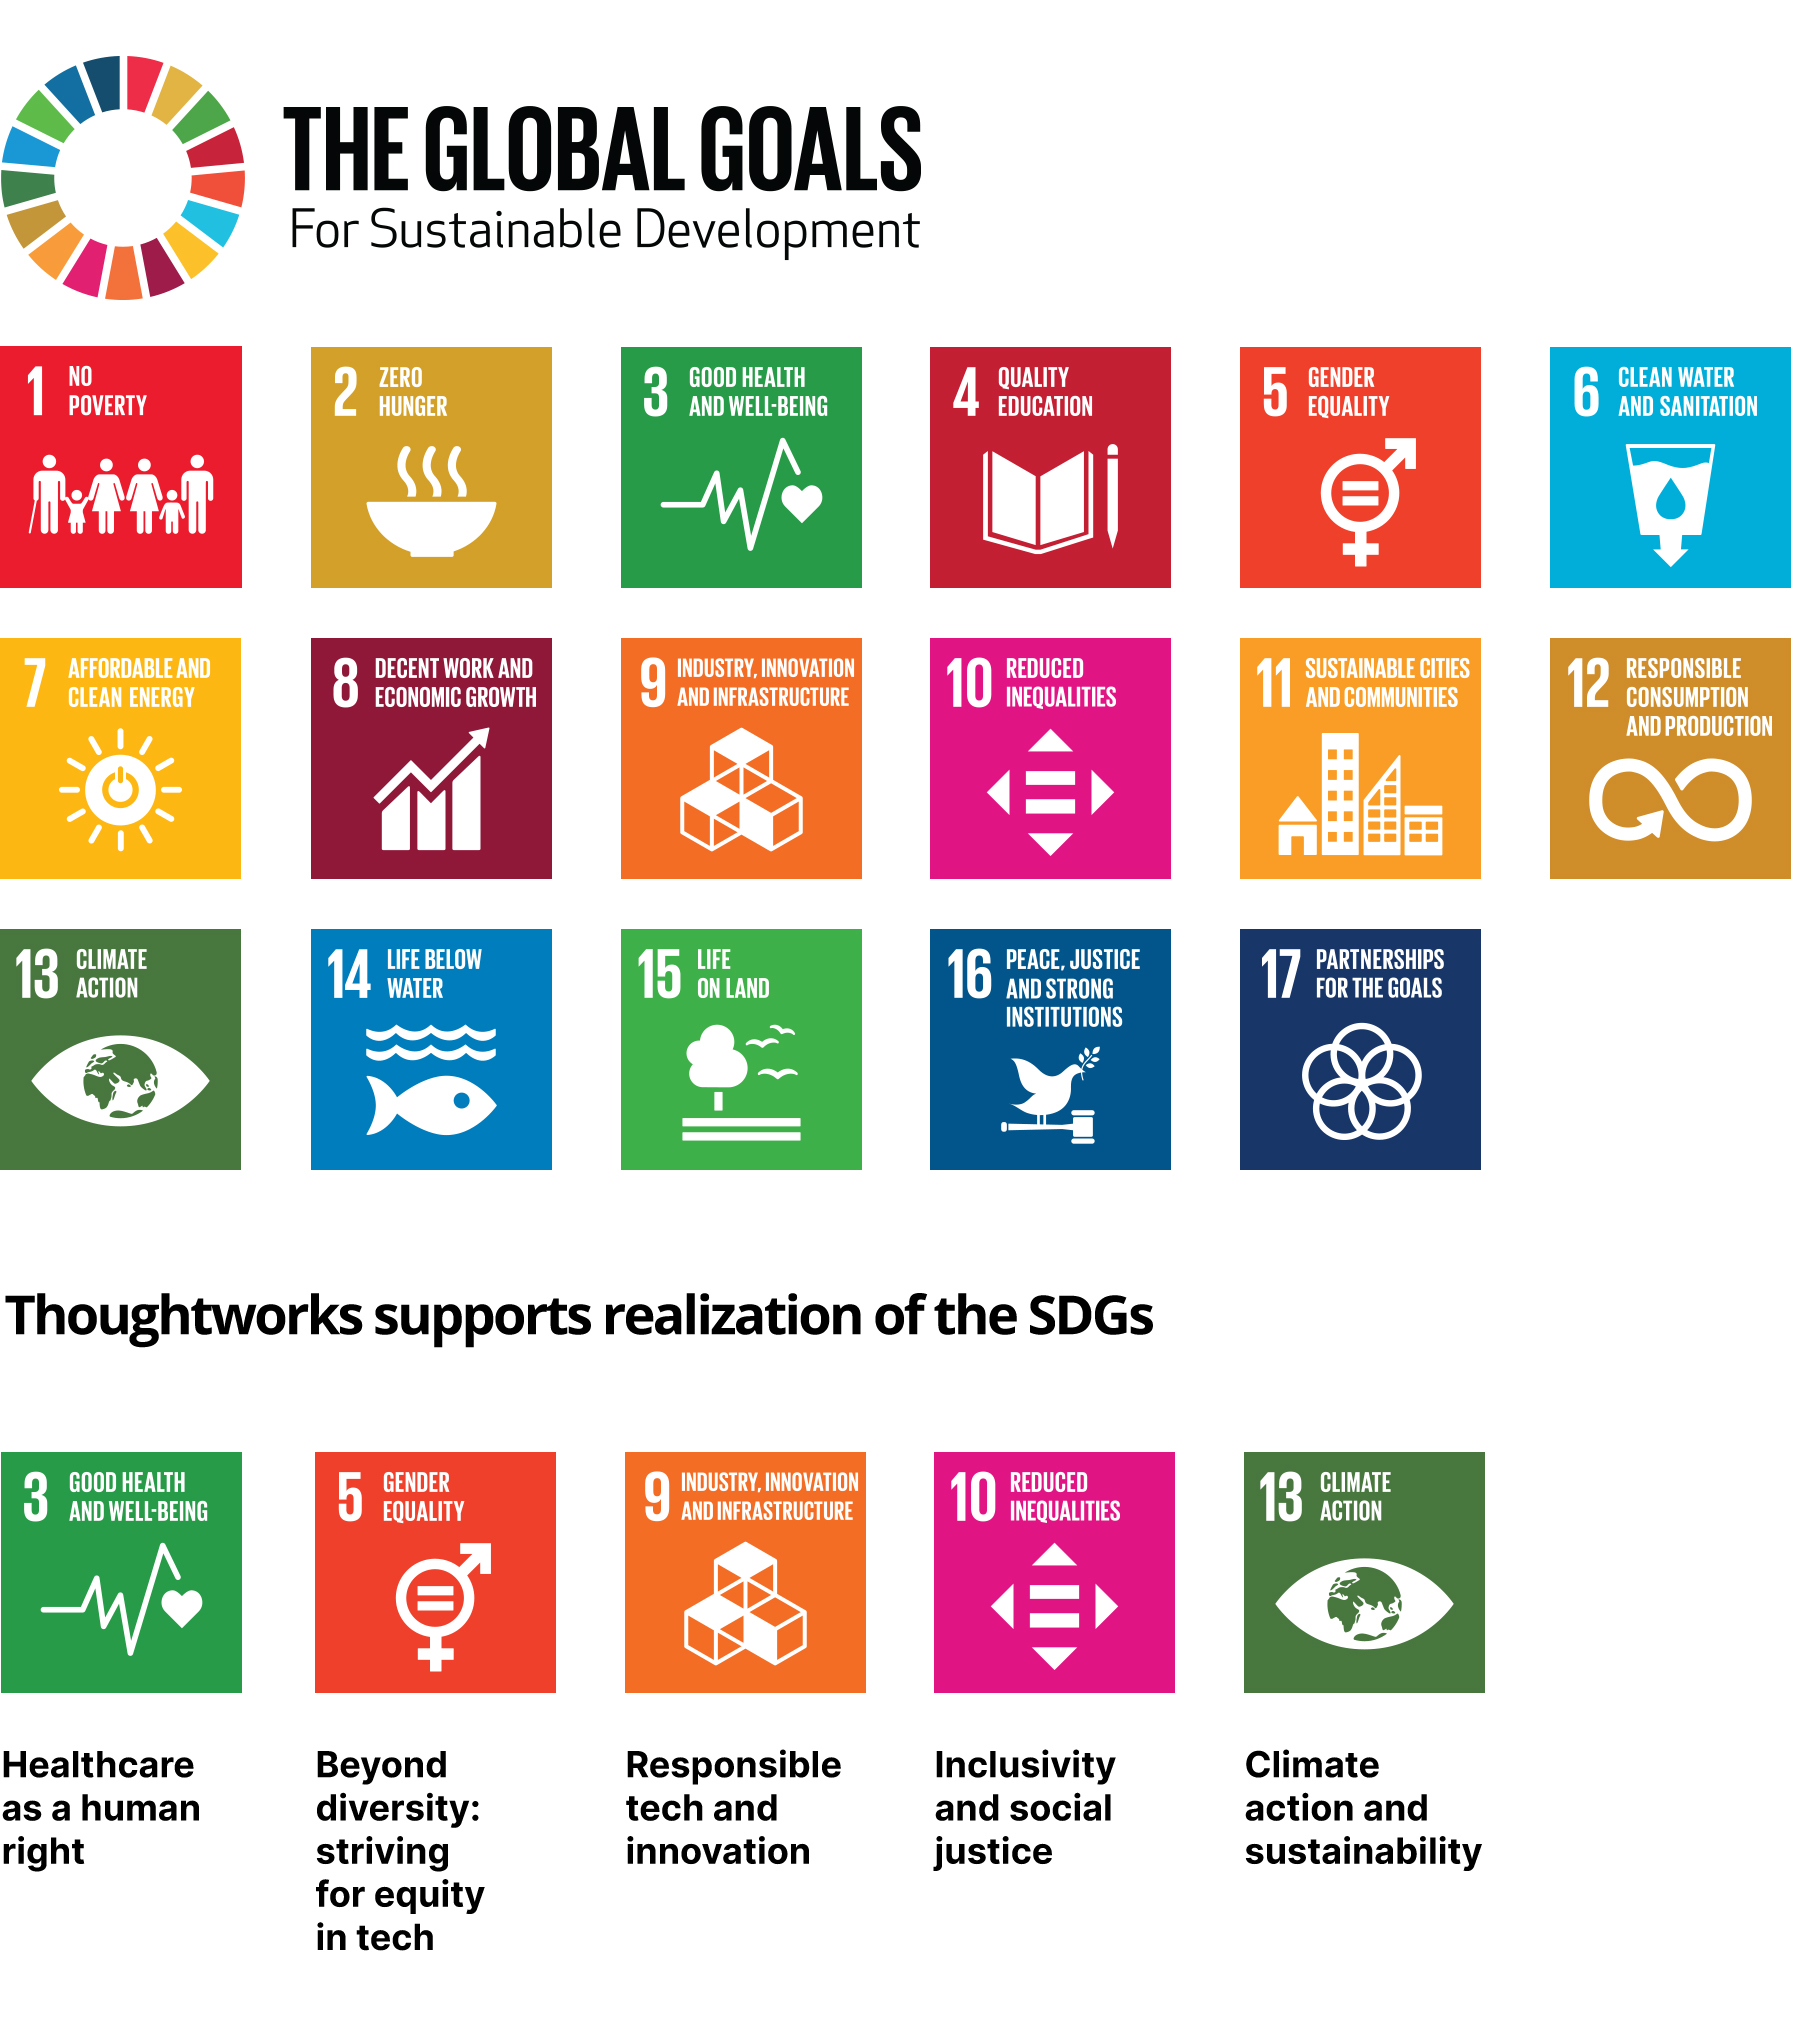 Graphic showing 17 icons, the UN global goals for sustainable development (SDGs). Thoughtworks supports realization, specifically, of five: Good health and wellbeing;  gender equality;  industry, innovation and infrastructure;  reduced inequalities; climate action. 